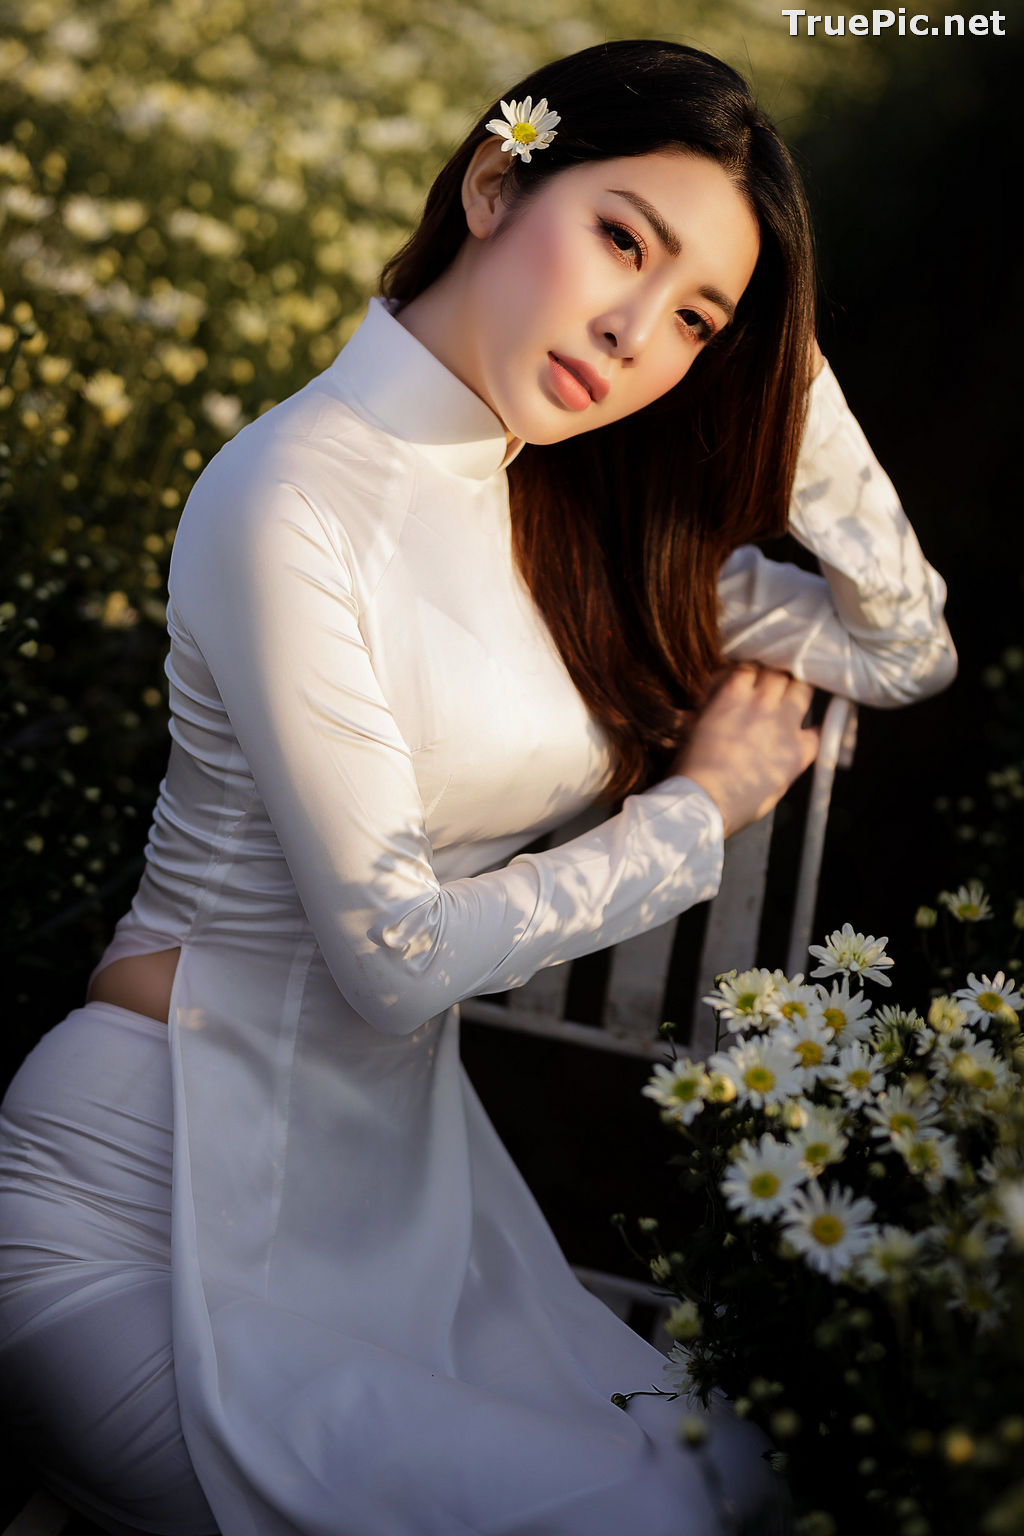 Image The Beauty of Vietnamese Girls with Traditional Dress (Ao Dai) #5 - TruePic.net - Picture-20